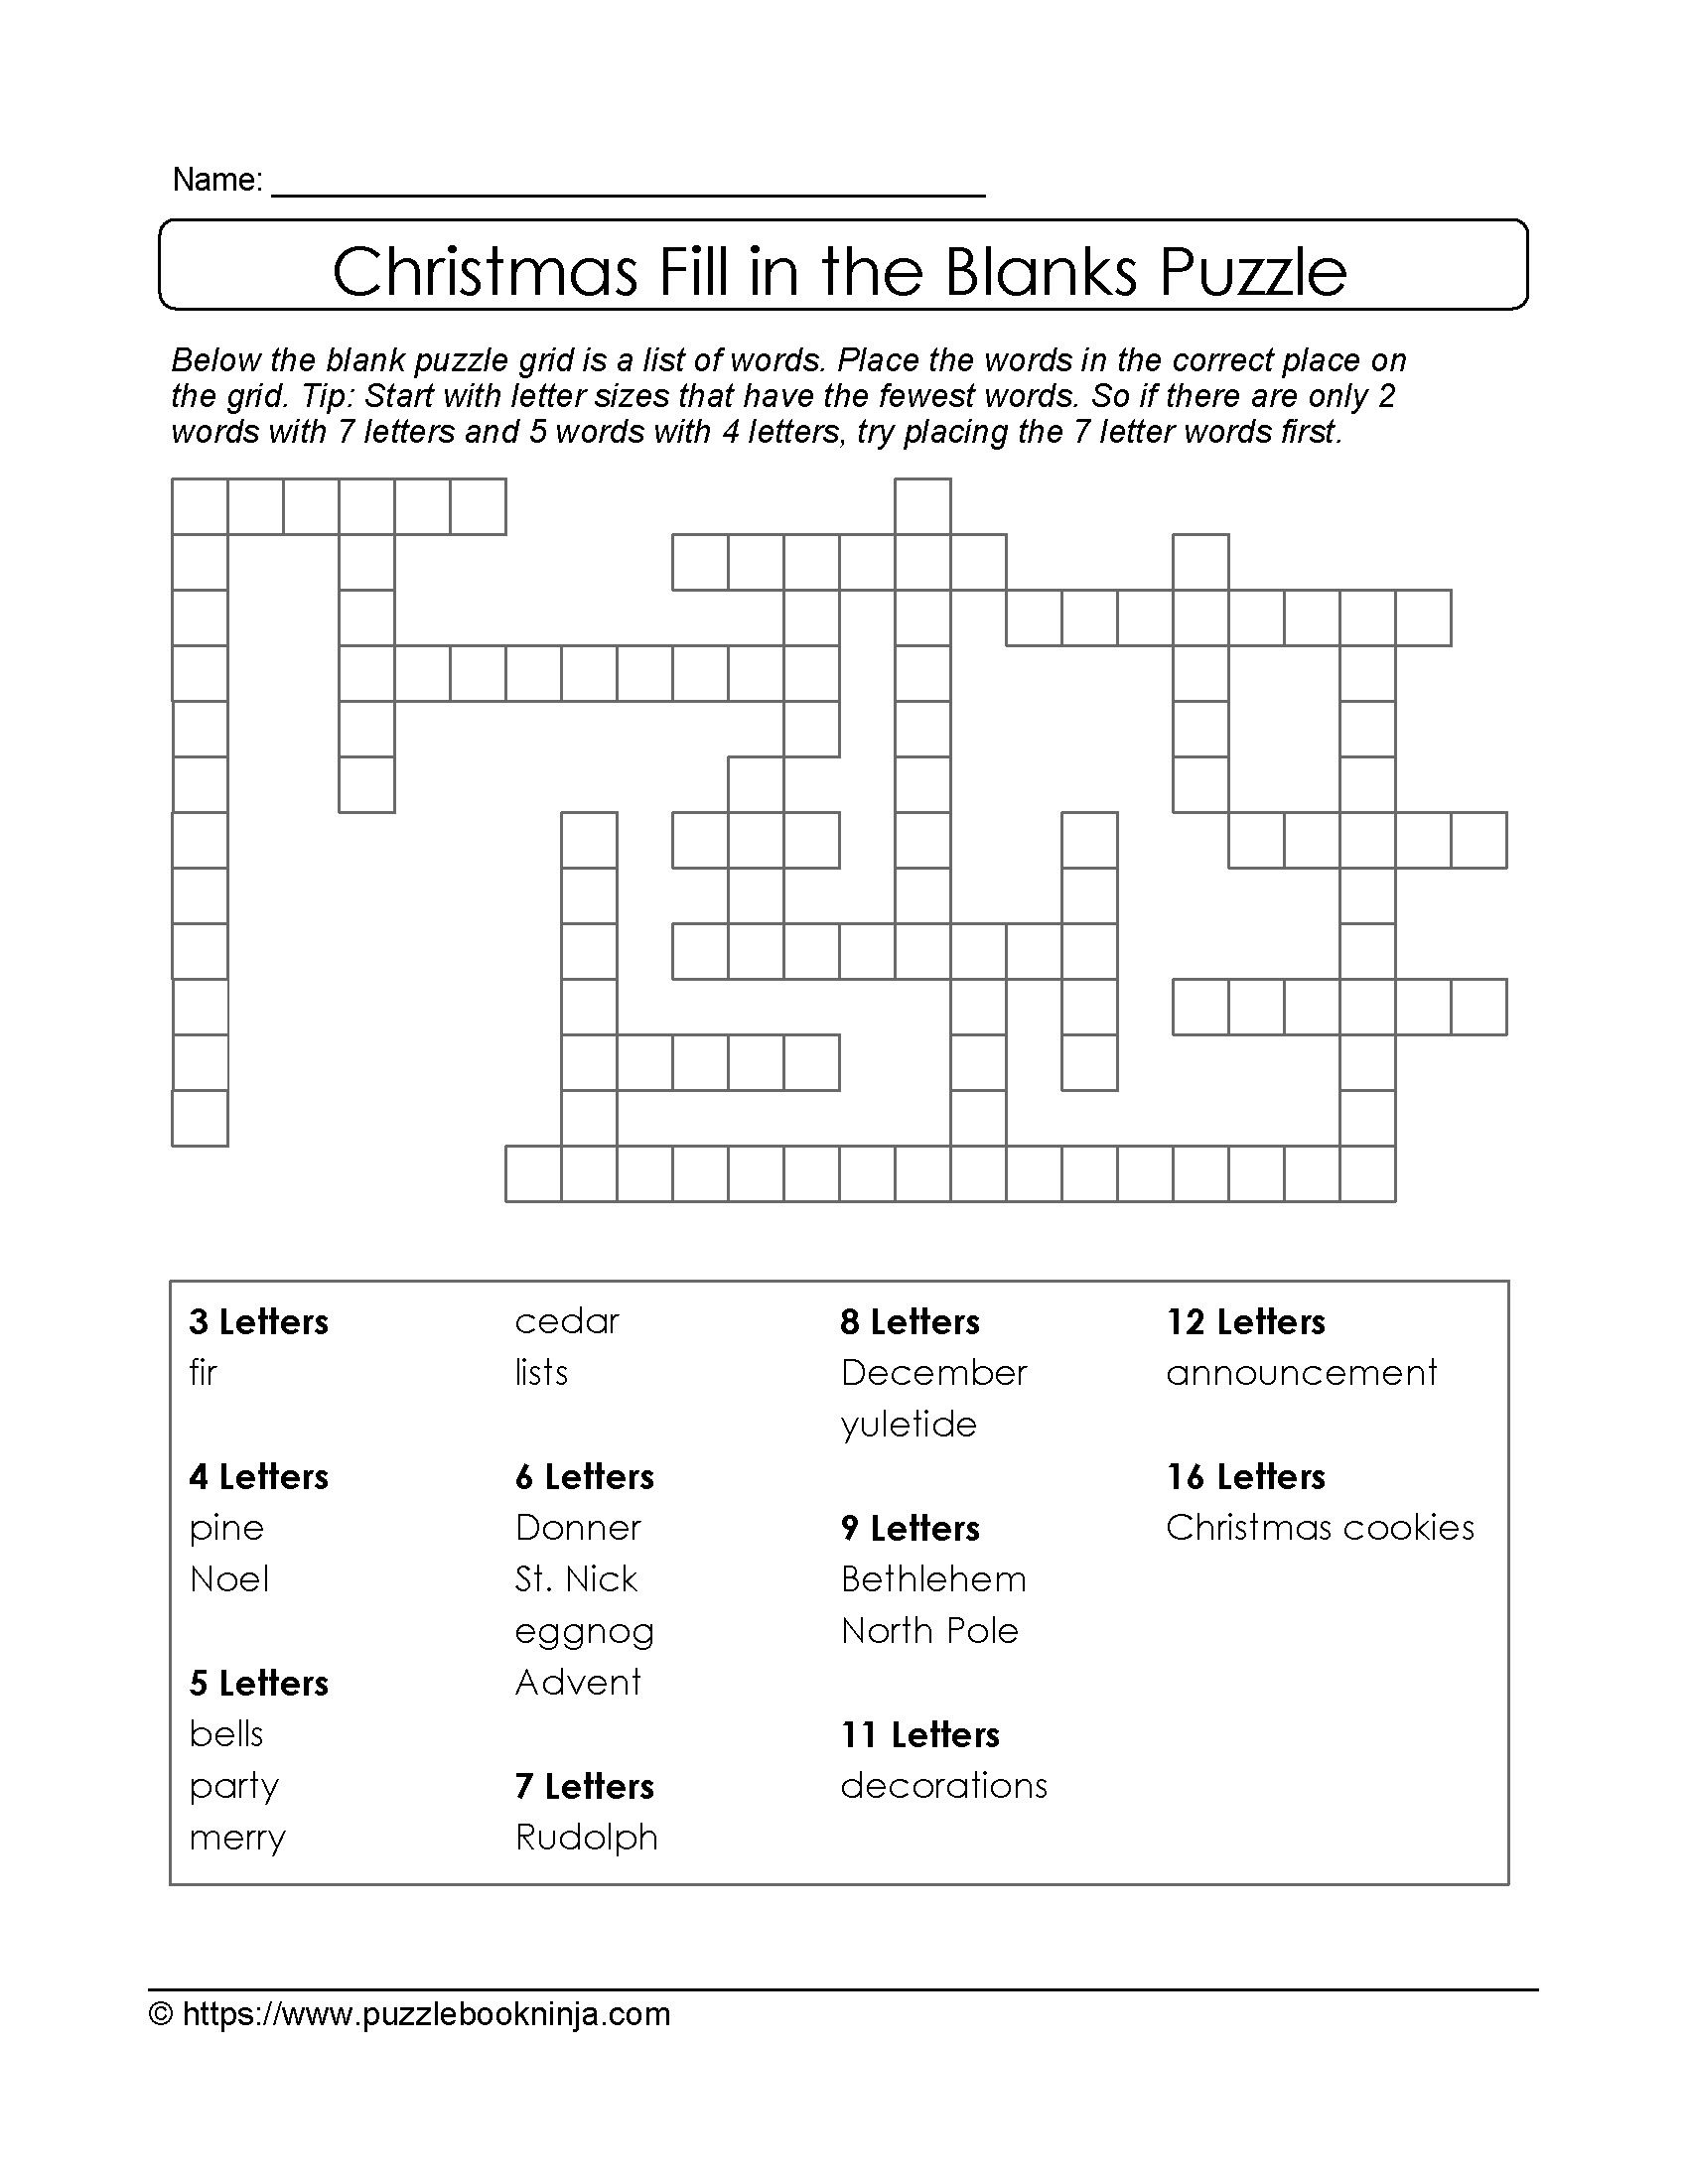 Christmas Printable Puzzle. Free Fill In The Blanks. | Christmas - Printable Blank Crossword Grid